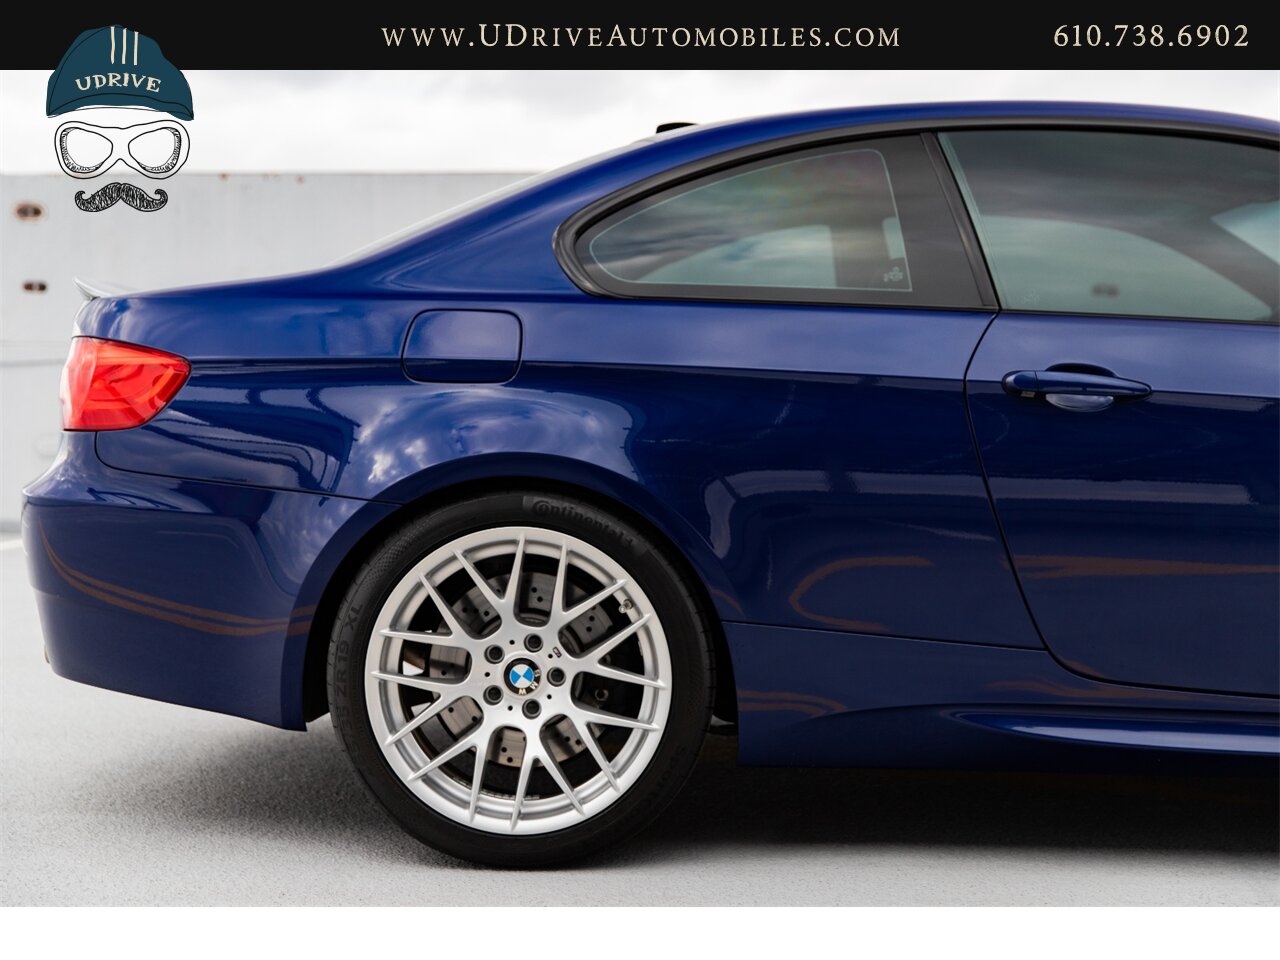 2011 BMW M3 E92 6 Speed Manual Competition Pkg Interlagos Blue  16k Miles Nav PDC EDC Comf Acc - Photo 18 - West Chester, PA 19382